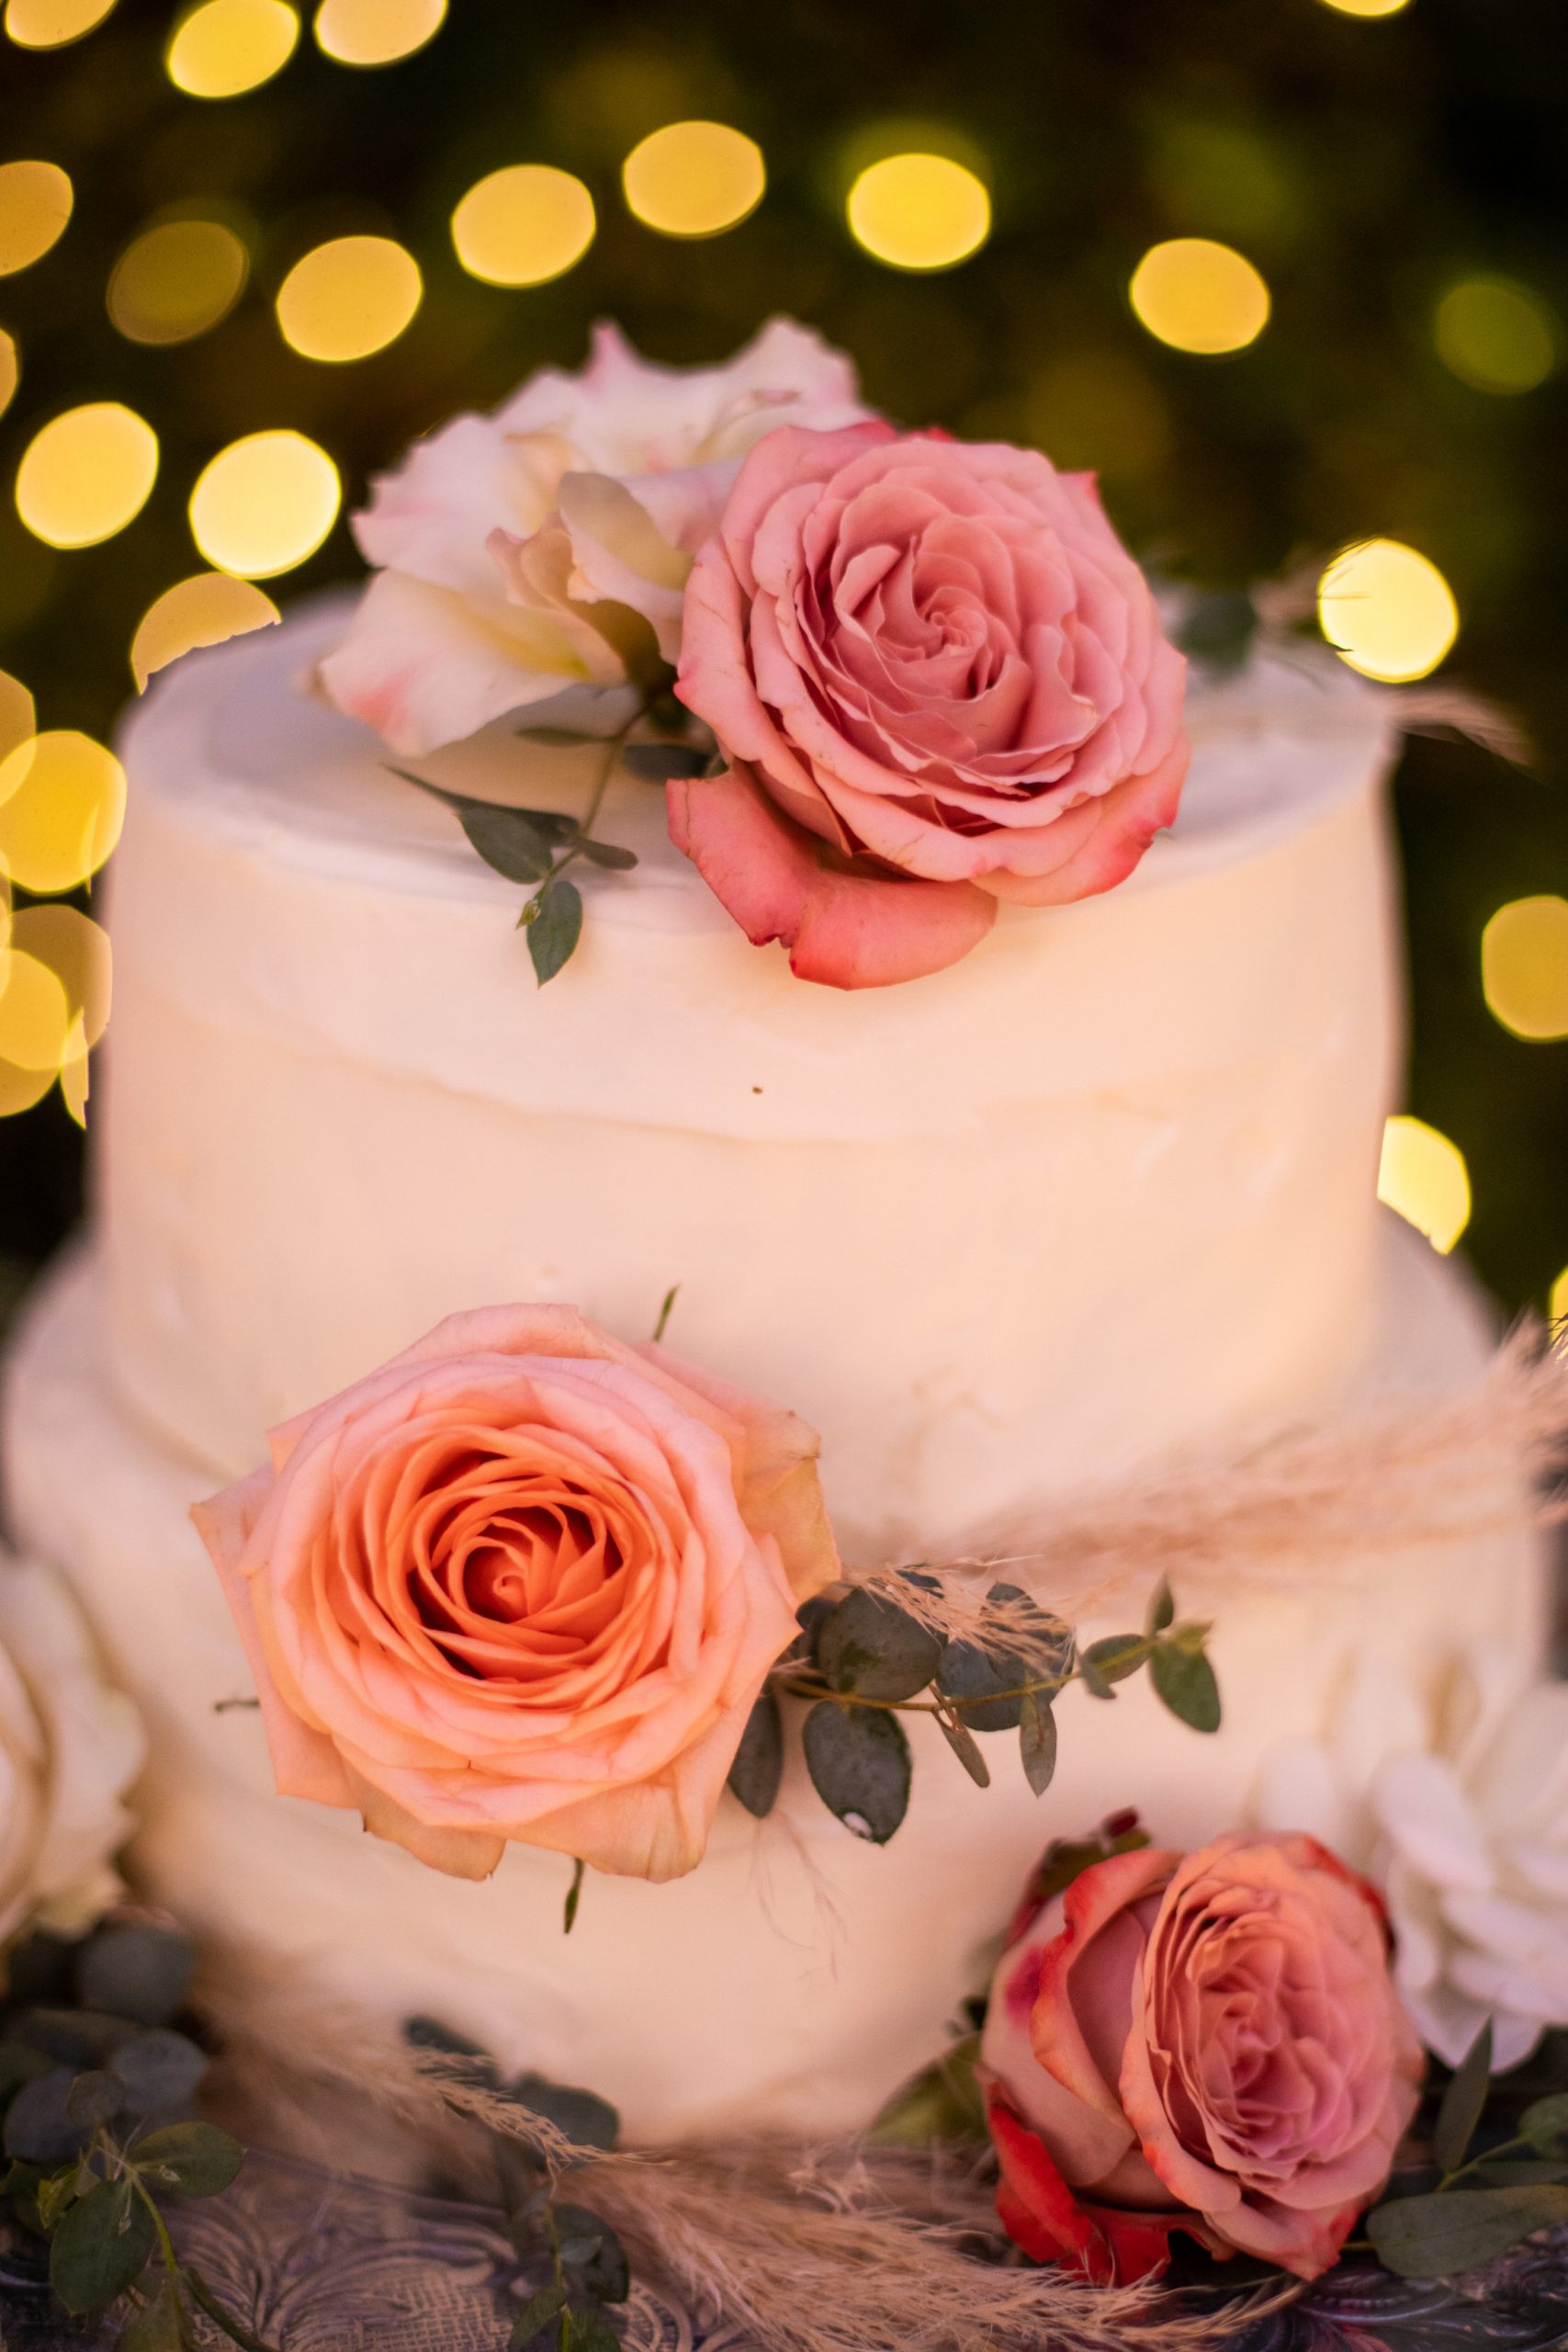 Wedding cake with pink roses.